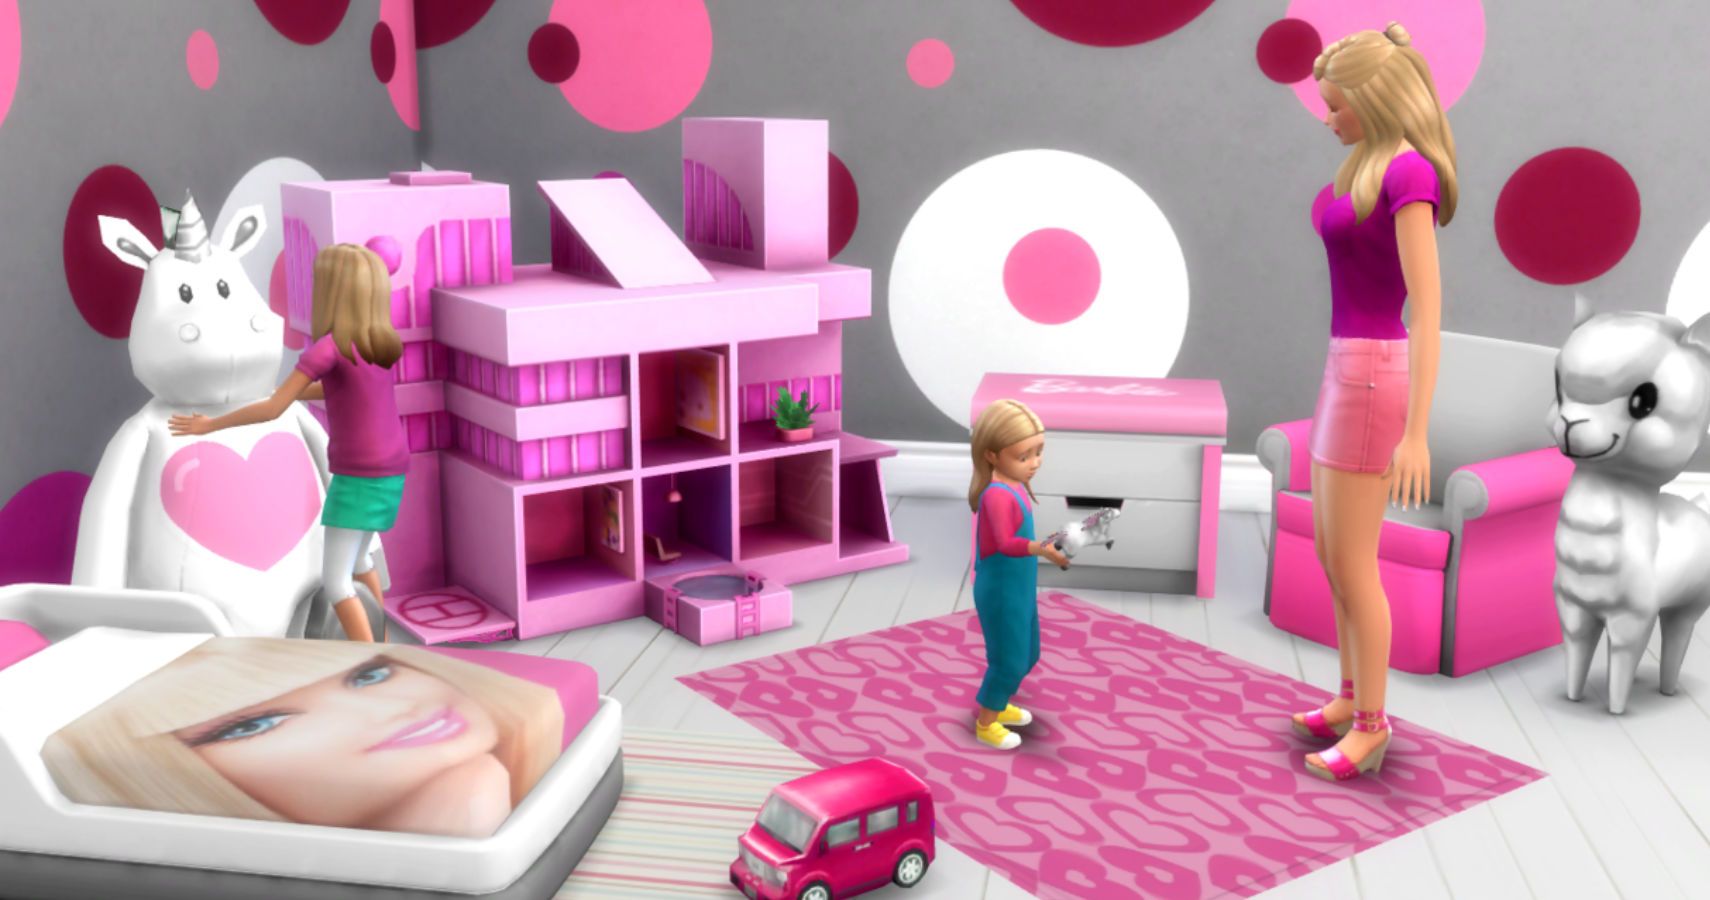 A sims toddler in a very vibrant barbie themed pink room.